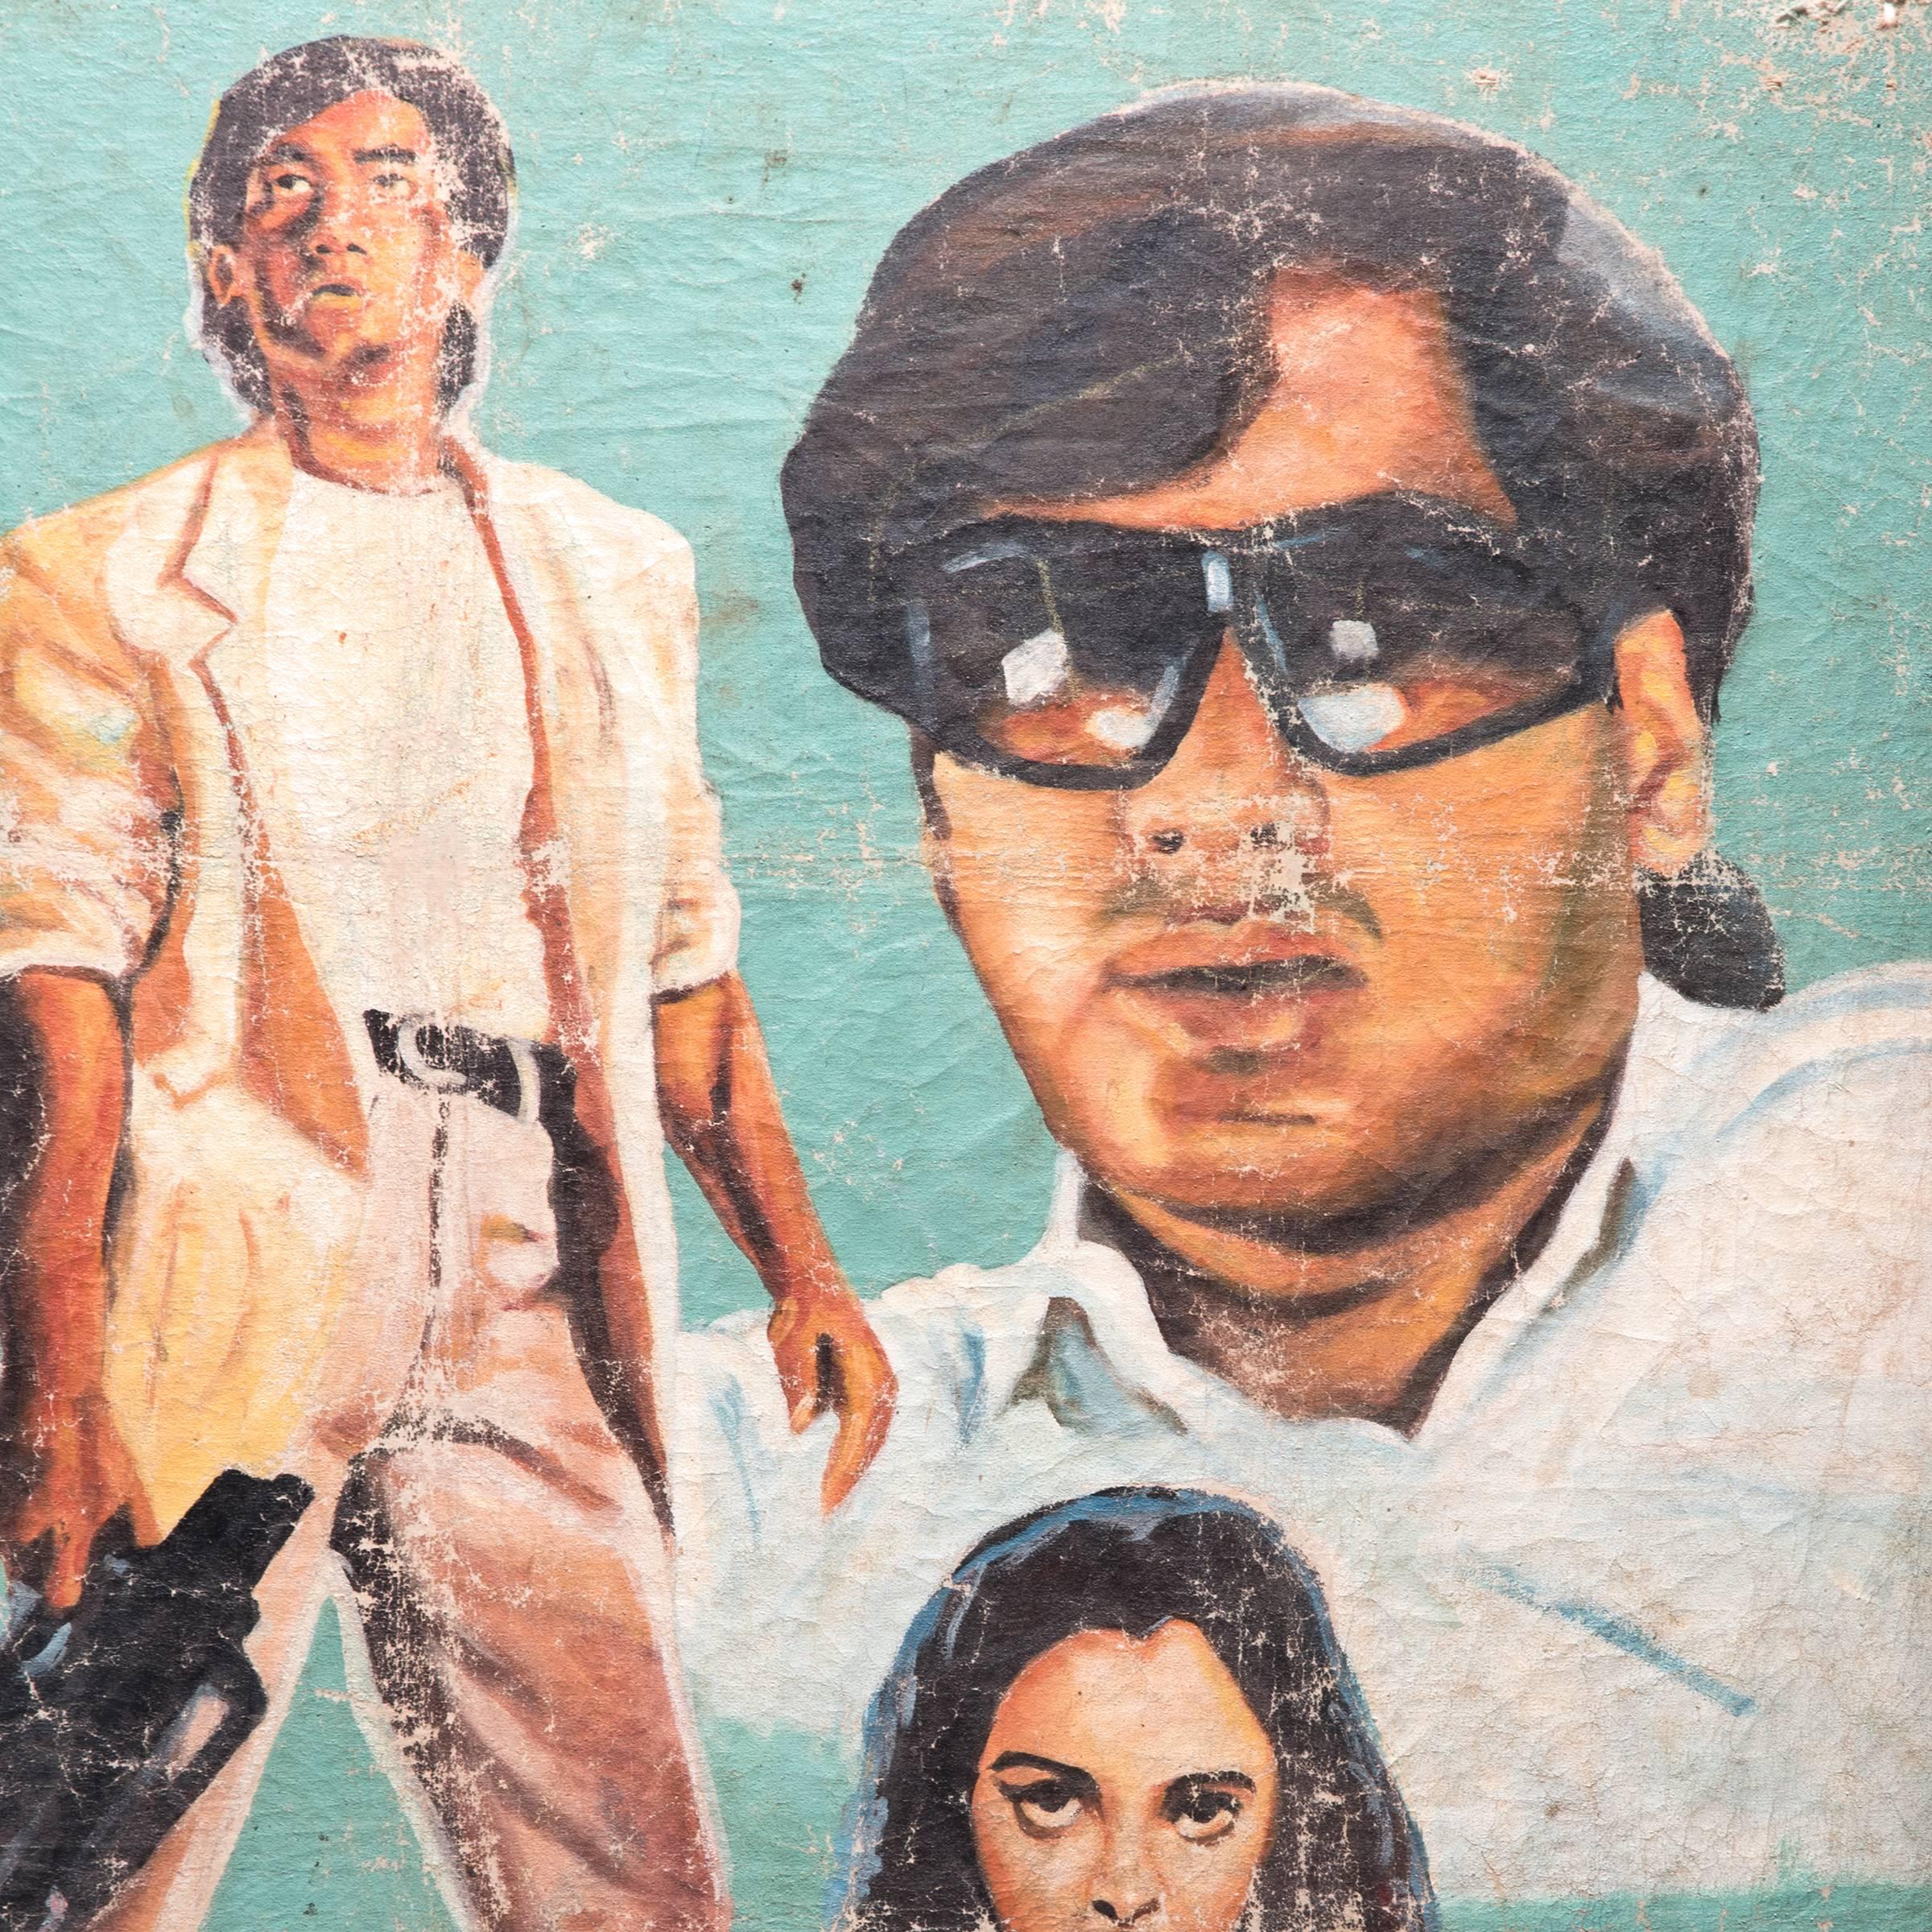 Vijaypath was a Bollywood action hit in 1994. It's critically acclaimed soundtrack topped charts across the world and became one of the most recognizable in India's history. The film's international success is evident in this hand-painted